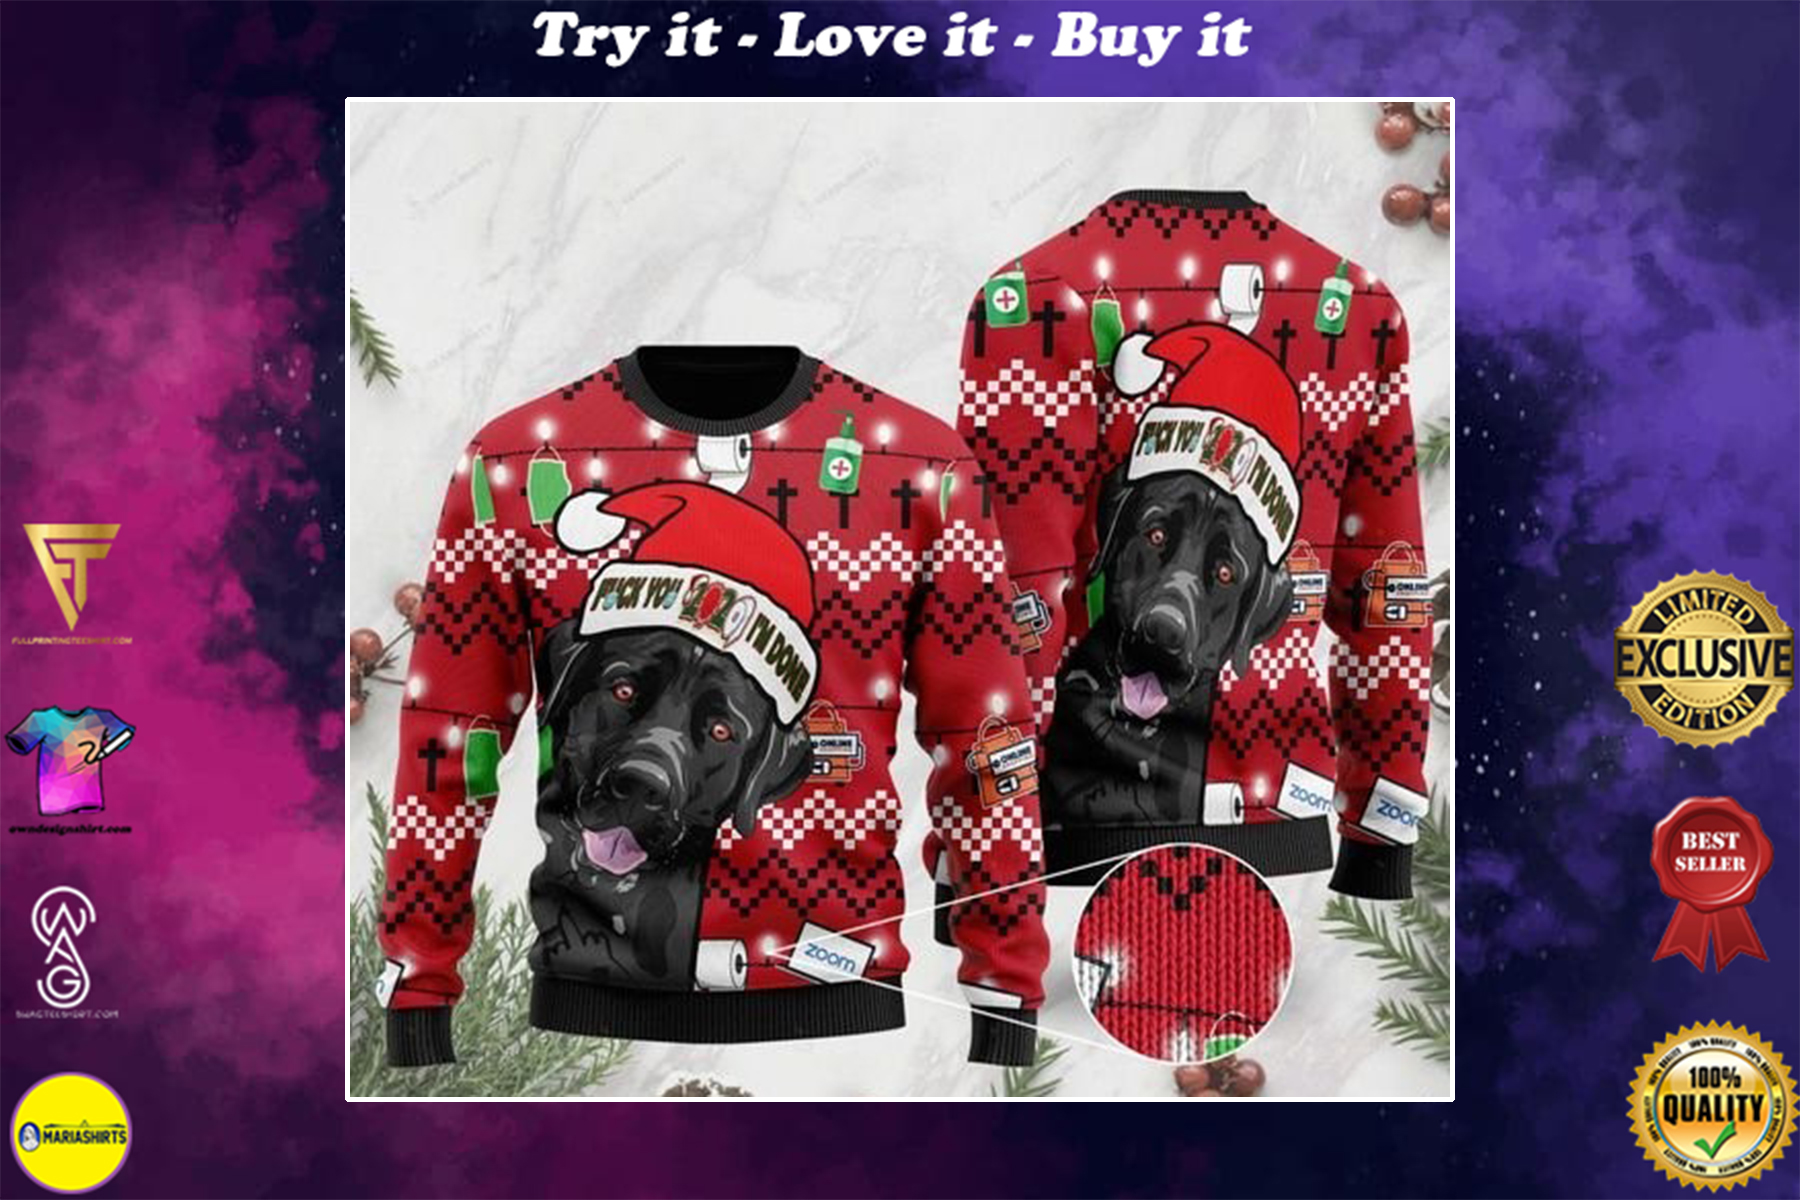 [highest selling] black labrador retriever and fuck 2020 im done christmas ugly sweater – maria